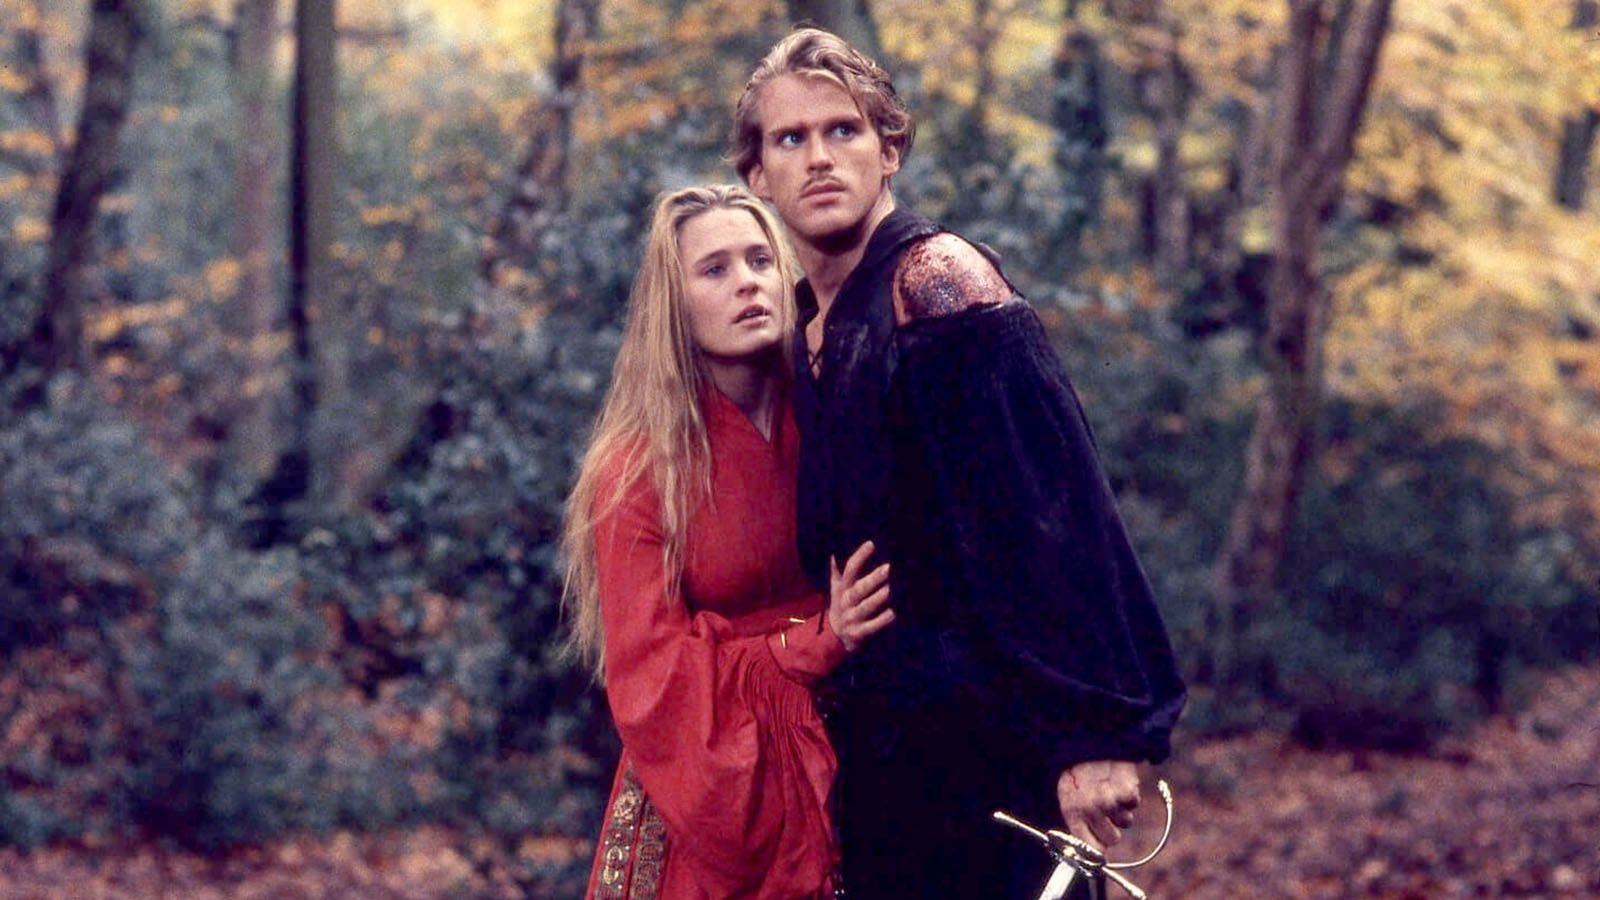 Honeywell Center in Wabash will host a special screening of the 1987 film The Princess Bride. Following the movie, star Cary Elwes will discuss the filming and more. Pictured with Elwes is Robin Wright.